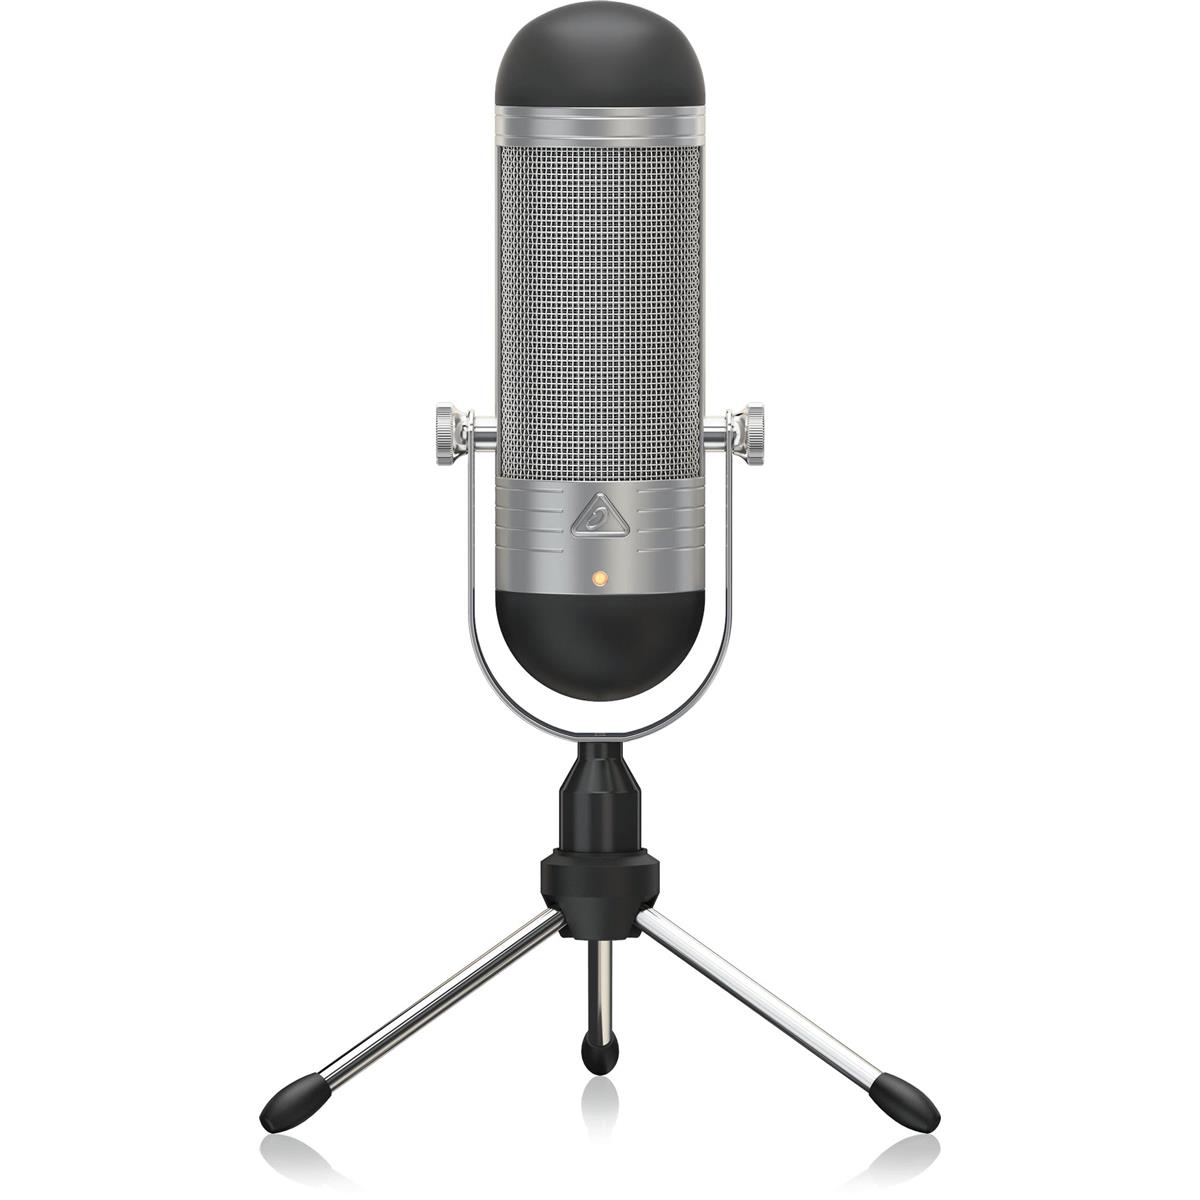 Image of Behringer BVR84 Vintage Capsule Supercardioid Condenser USB Microphone